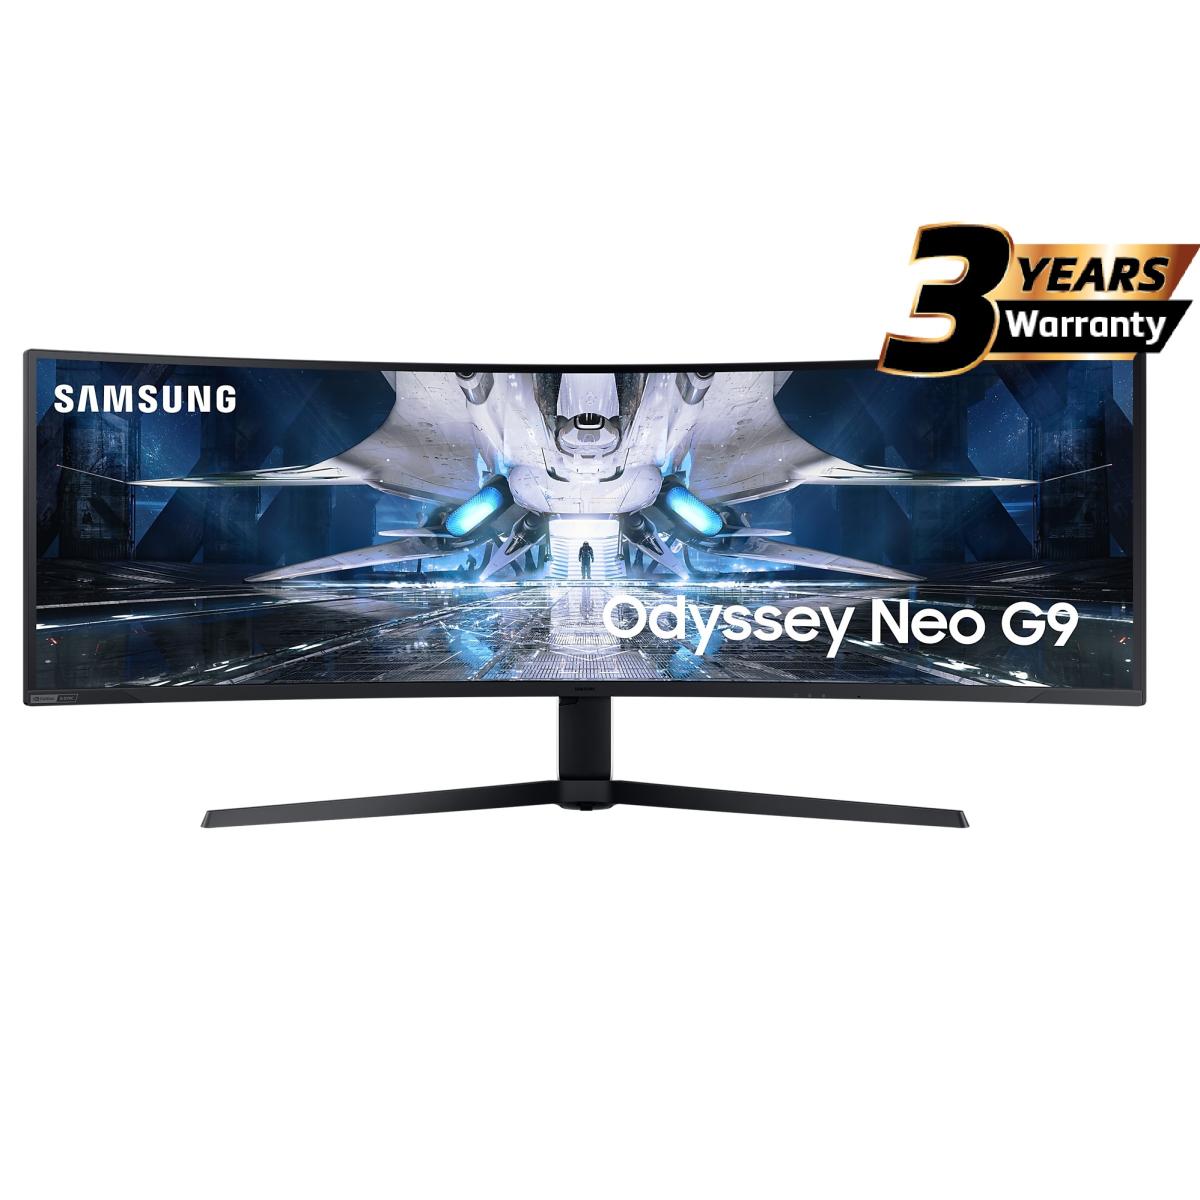 Samsung 49" Odyssey Neo G9 DQHD 240Hz 1ms G-Sync Compatible Quantum HDR2000 Curved Gaming Monitor